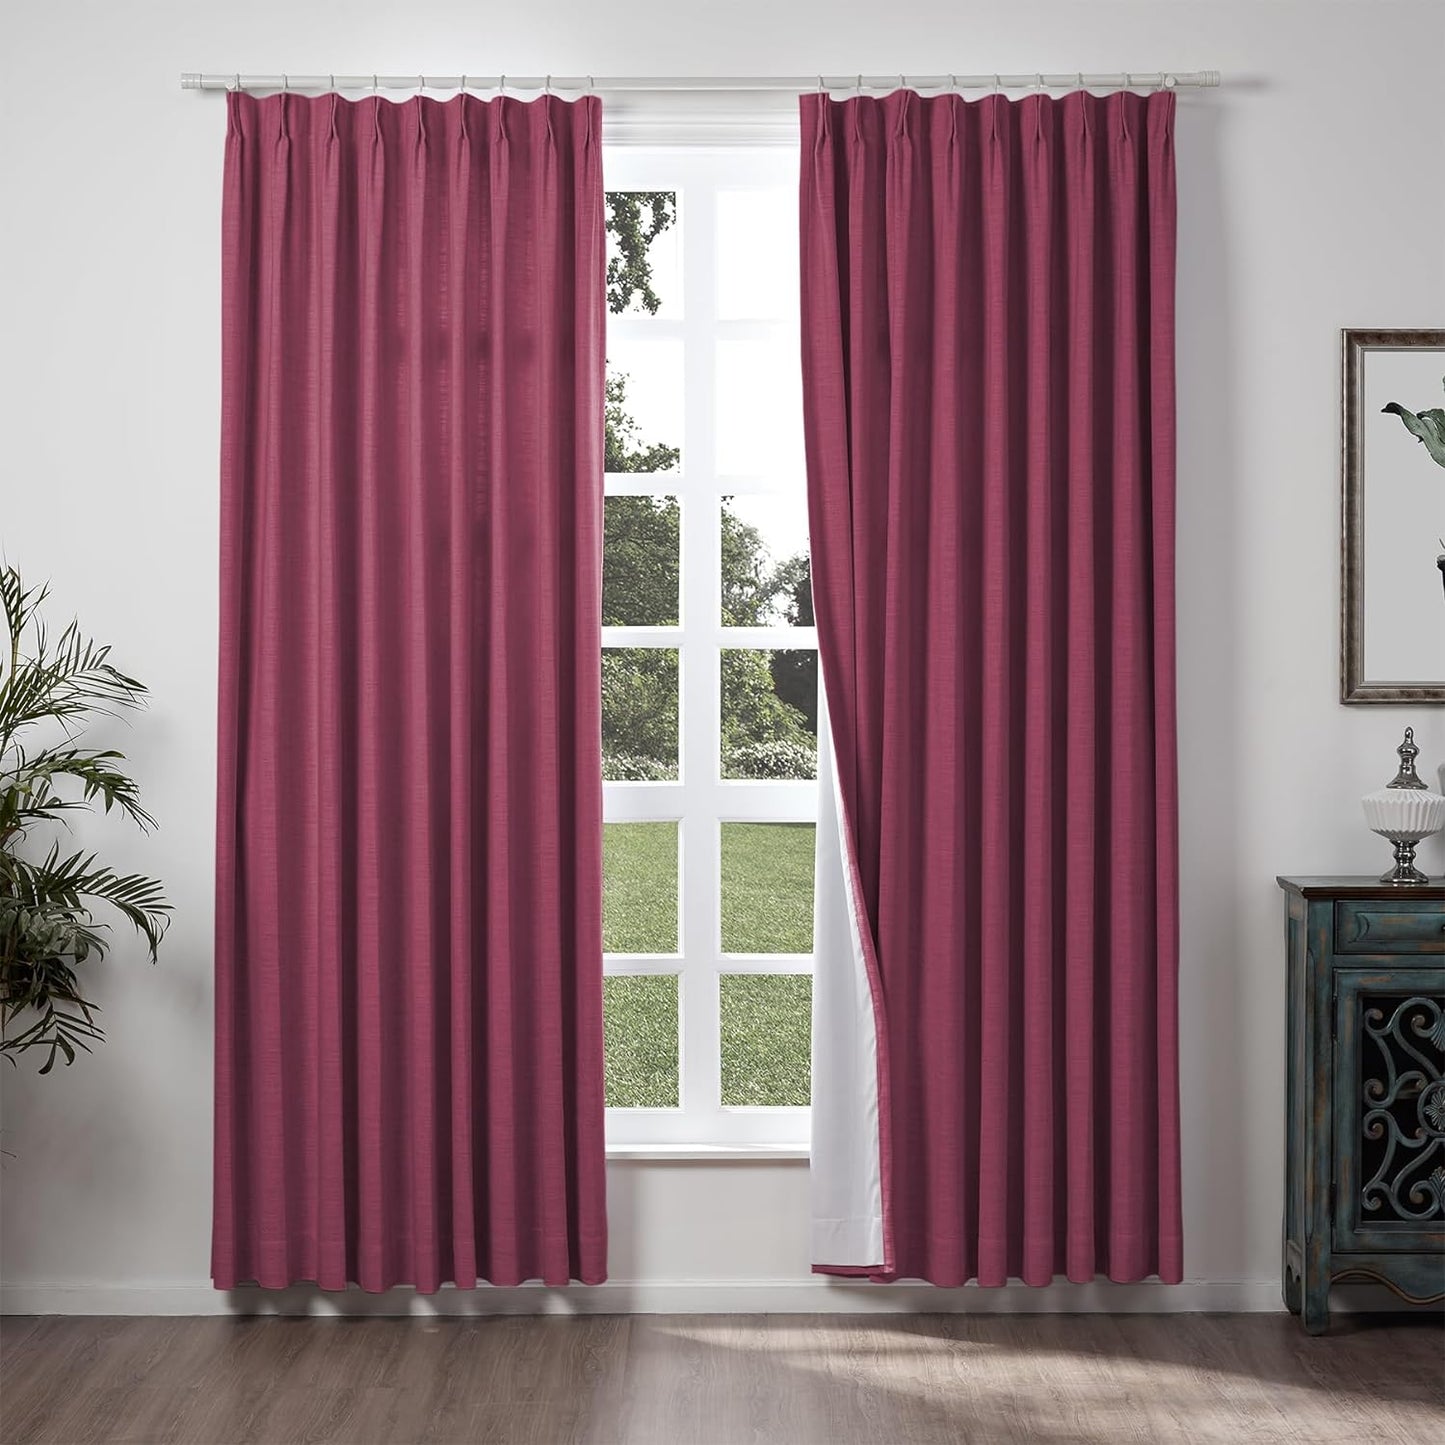 Chadmade 50" W X 84" L Polyester Linen Drape with Blackout Lining Pinch Pleat Curtain for Sliding Door Patio Door Living Room Bedroom, (1 Panel) Beige White Liz Collection  ChadMade Burgundy Red (22) 100Wx84L 